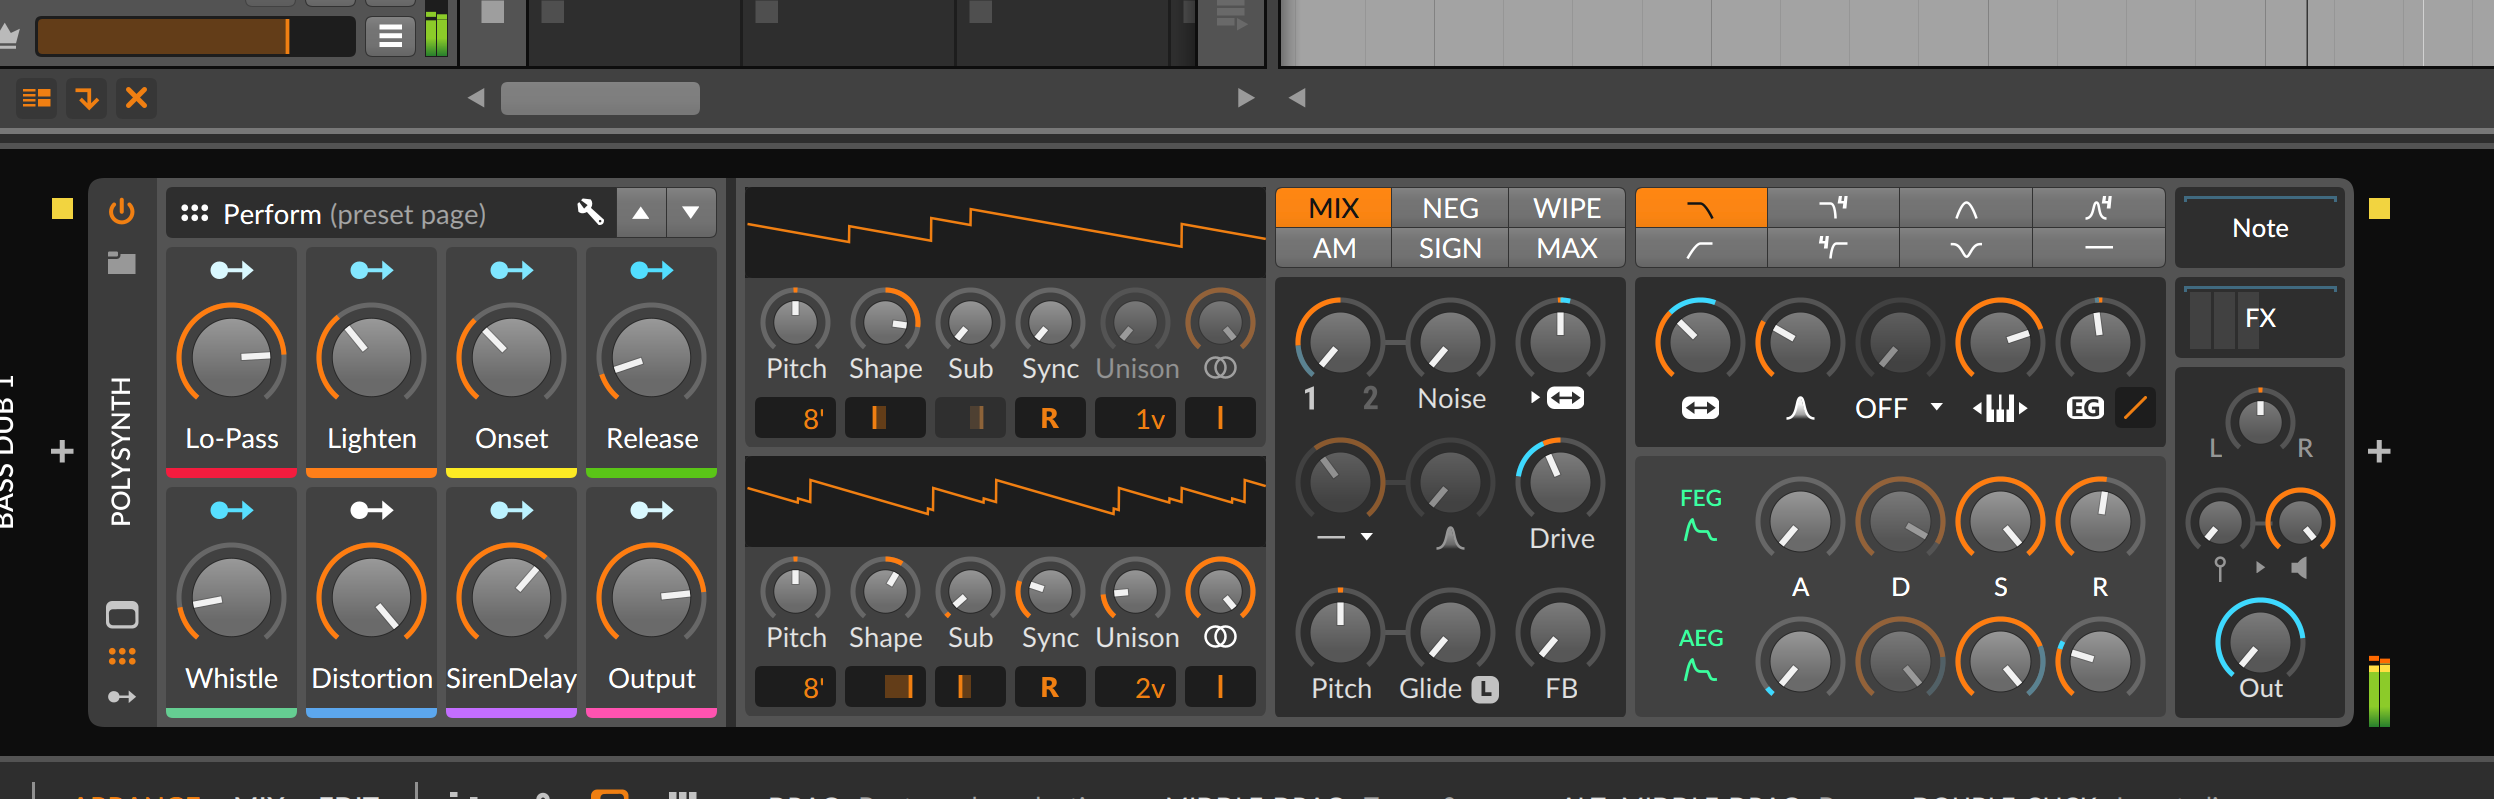 Bitwig Studio Producer (upgrade From 8-track) - Sequencer sofware - Variation 16